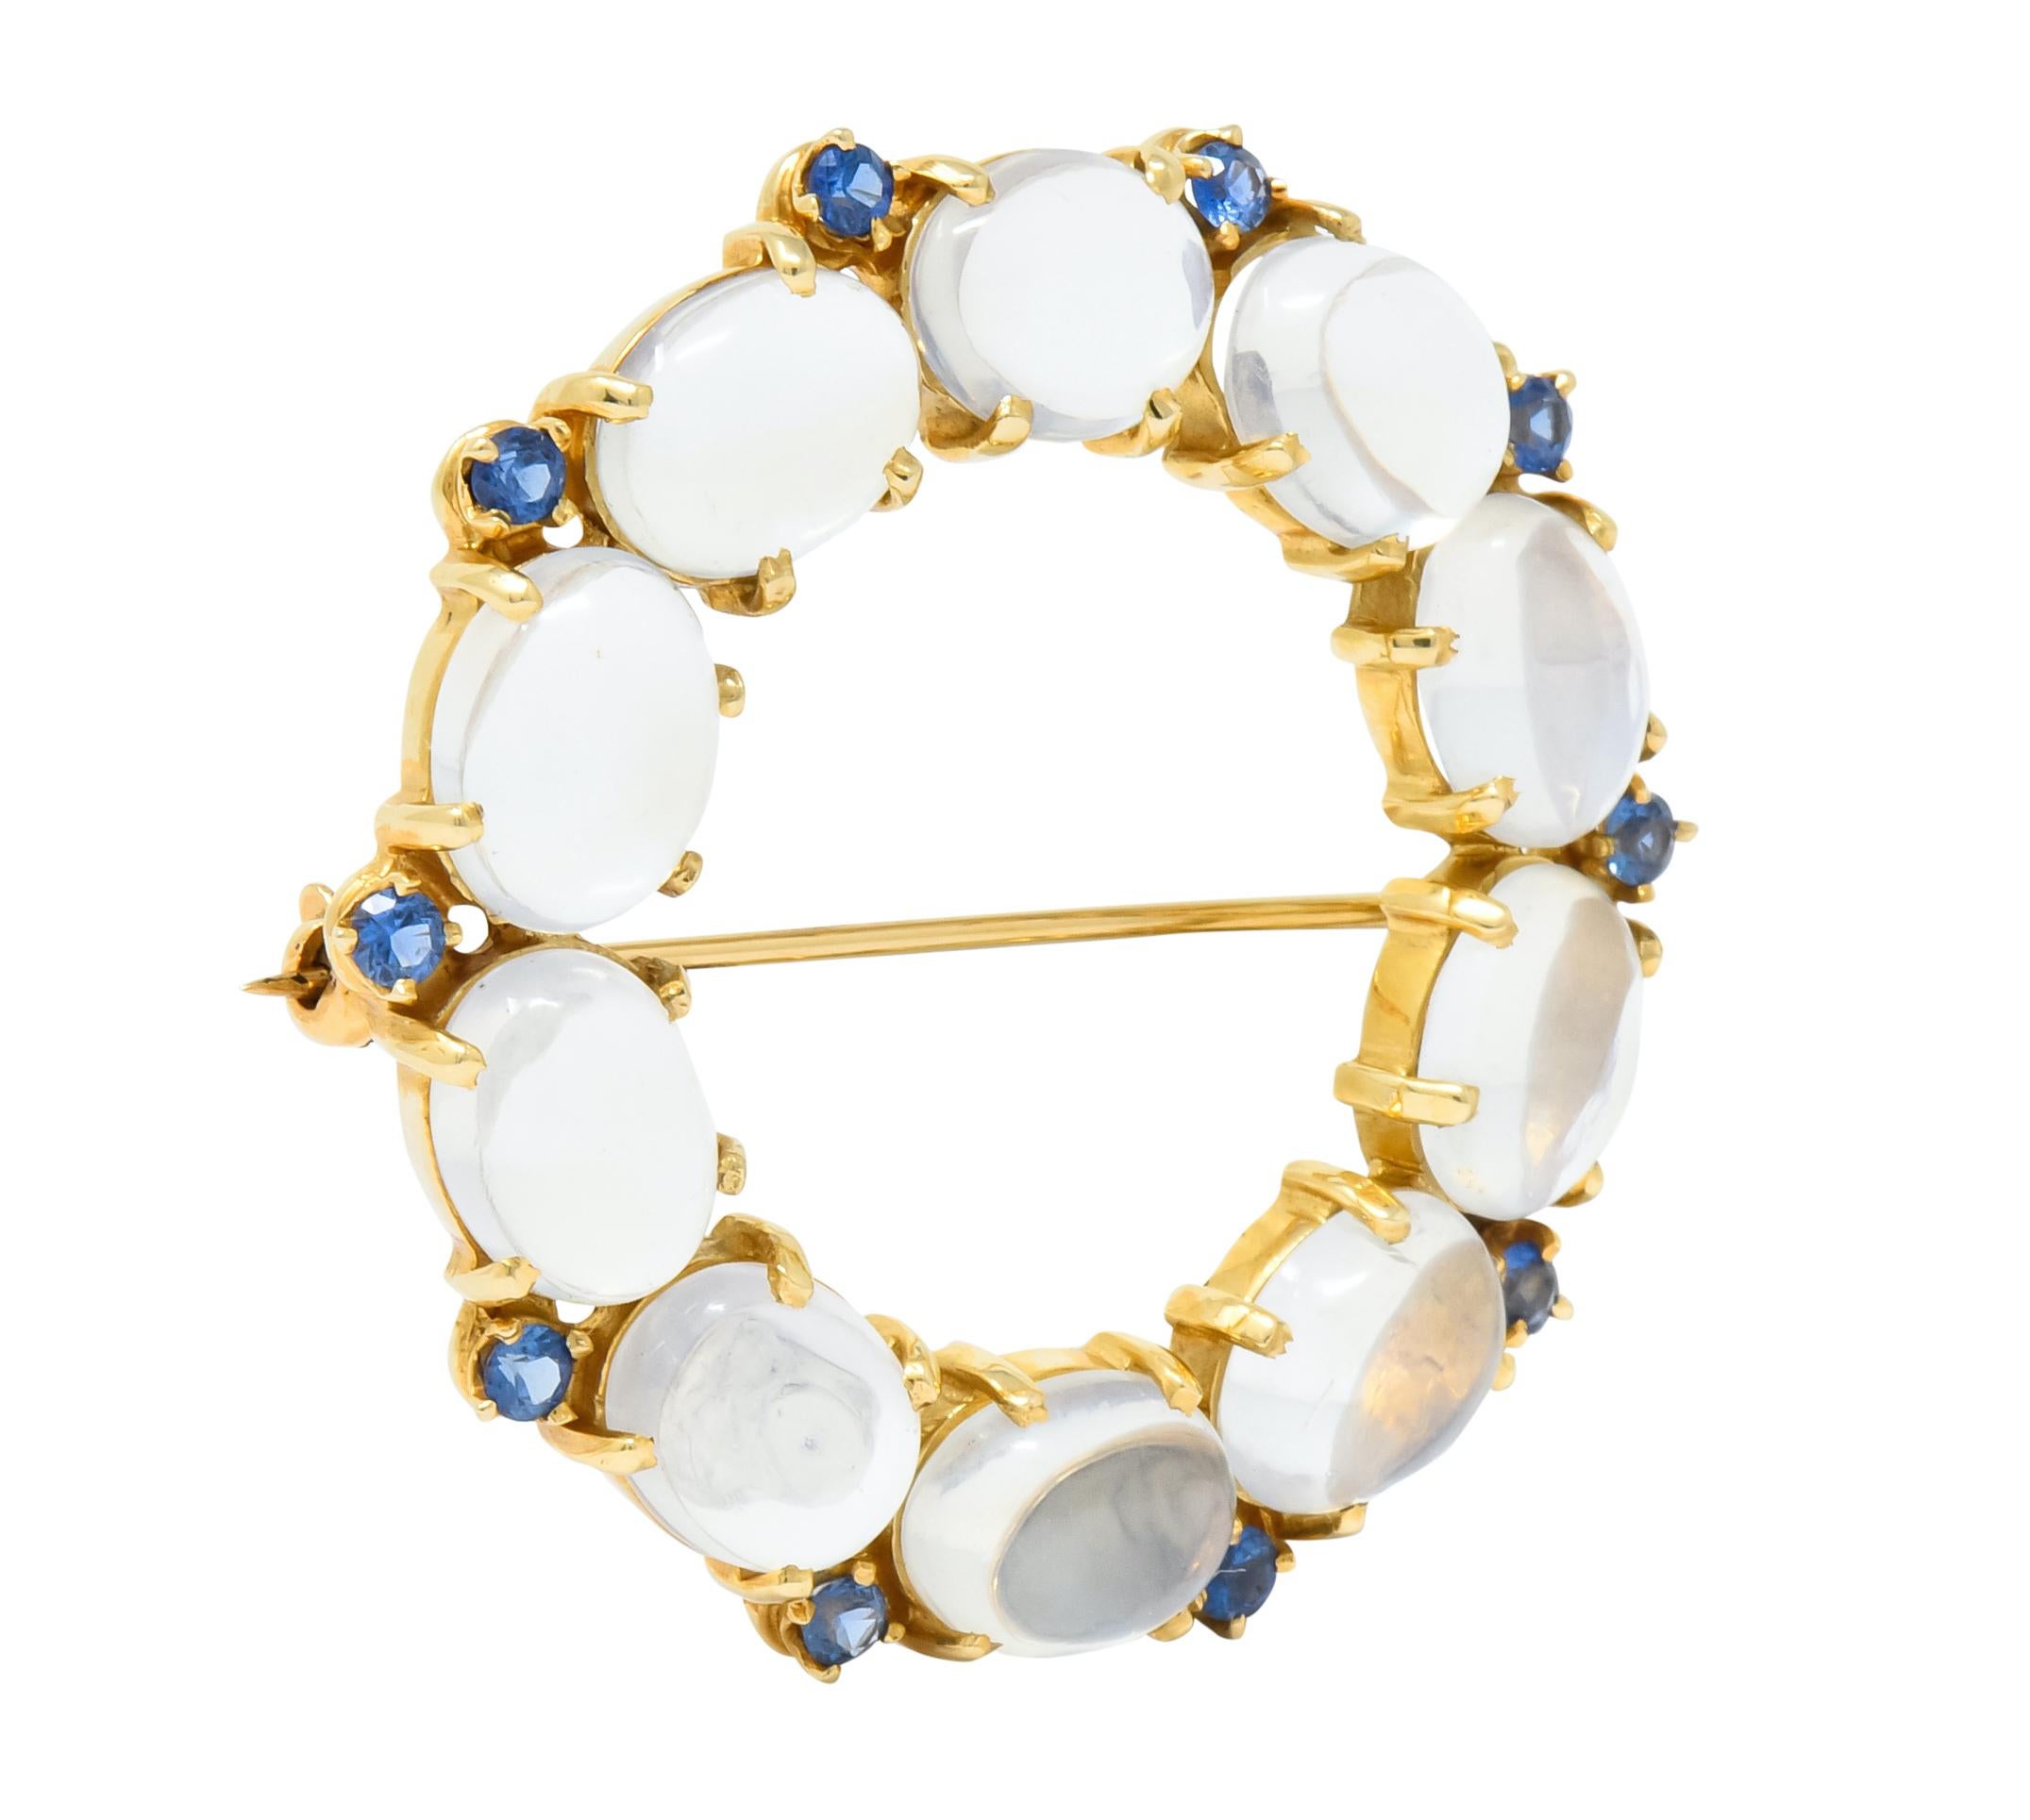 Wreath style brooch comprised of ten oval cabochon moonstones measuring approximately 9.0 x 6.5 mm, transparent with strong billowing blue adularescence 

Accented by round cut sapphire weighing approximately 1.00 carat total, transparent and